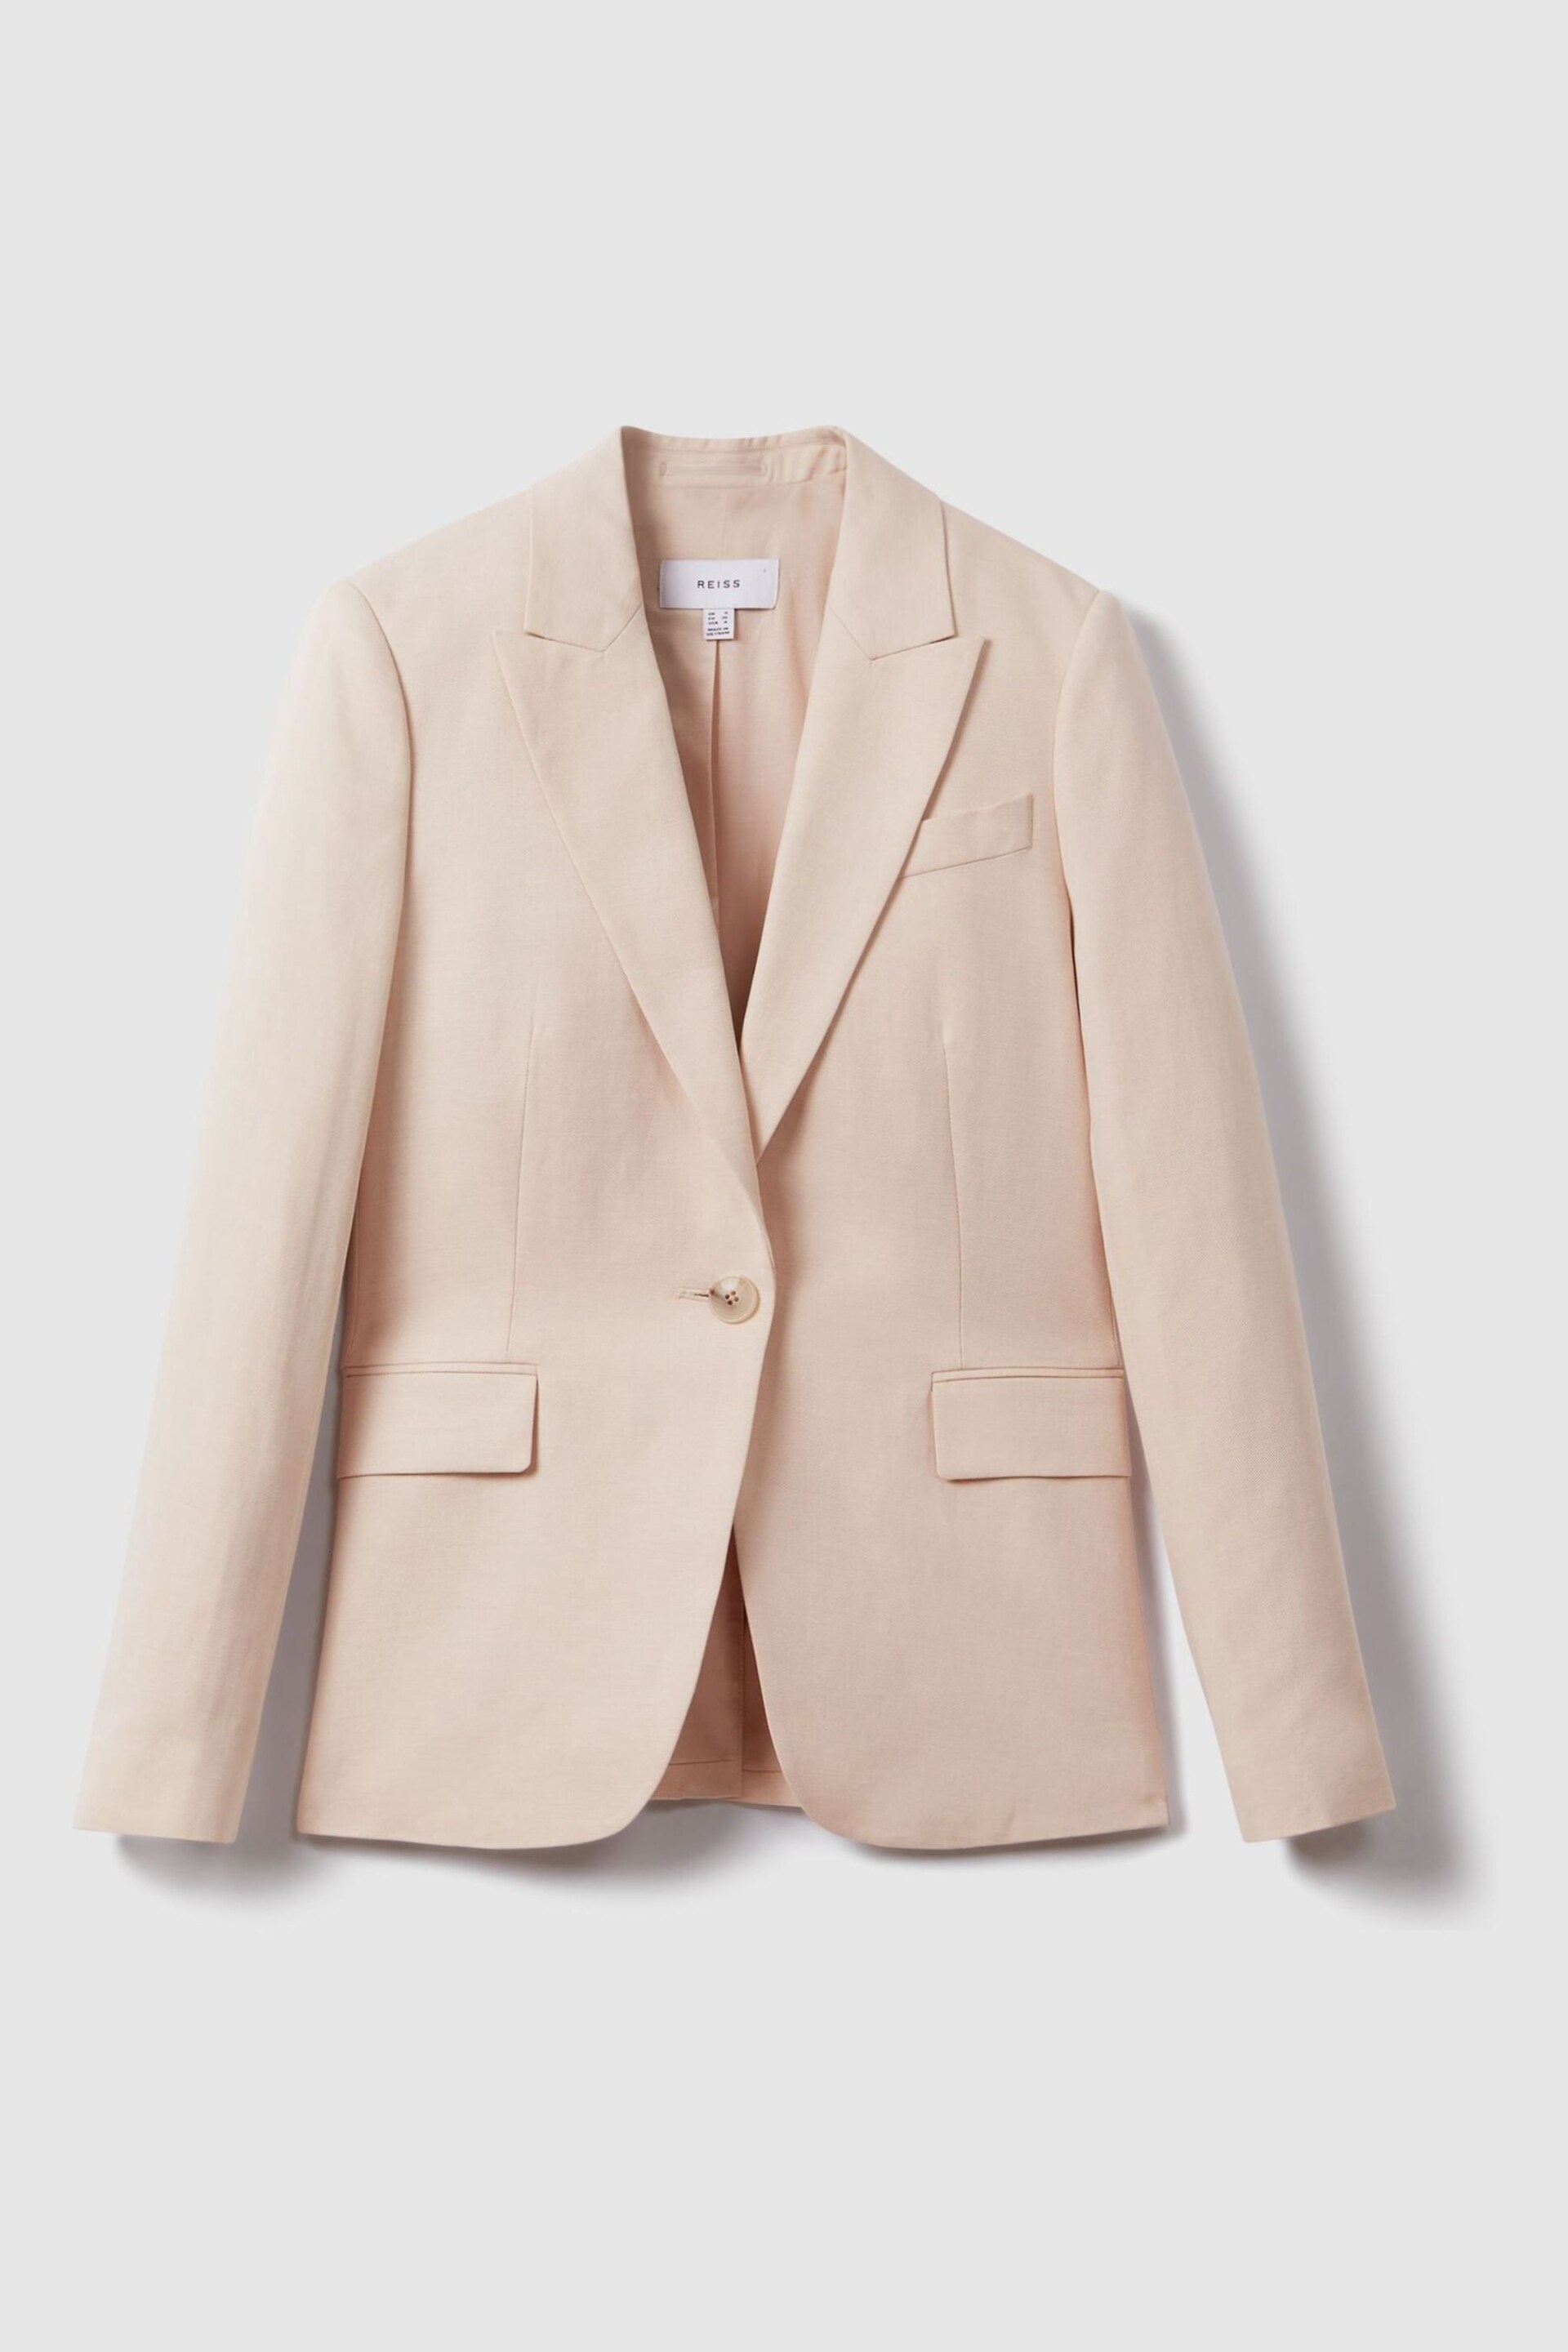 Reiss Pink Farrah Single Breasted Suit Blazer with TENCEL™ Fibers - Image 2 of 6